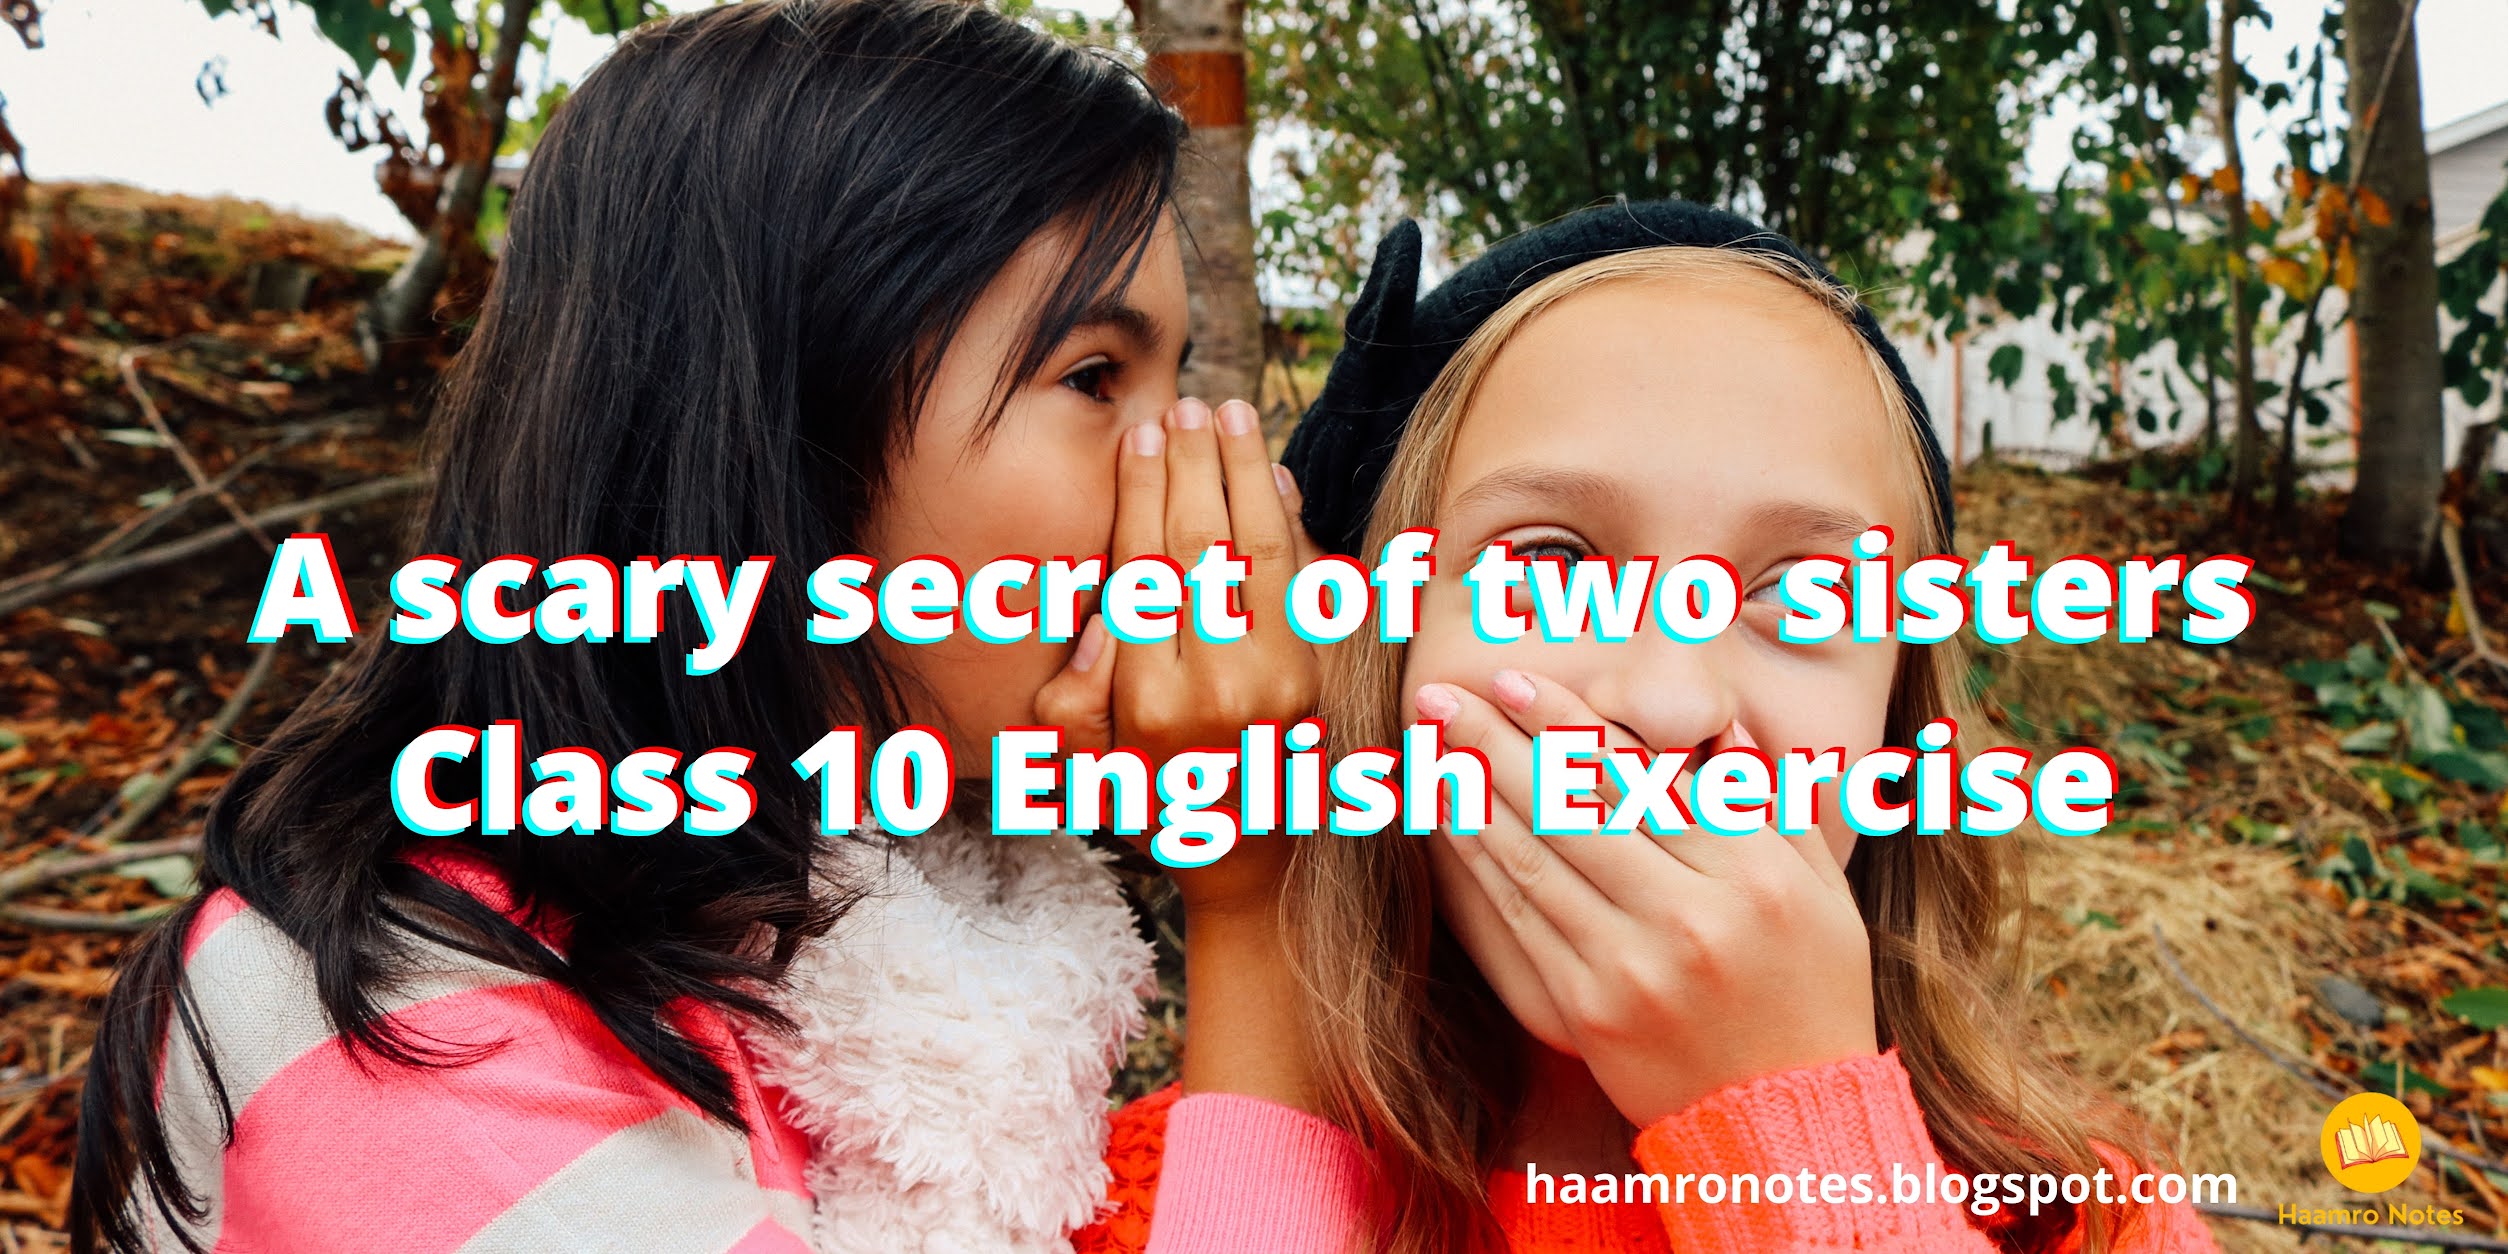 A Scary Secret Of Two Sisters Class 10 English Exercise